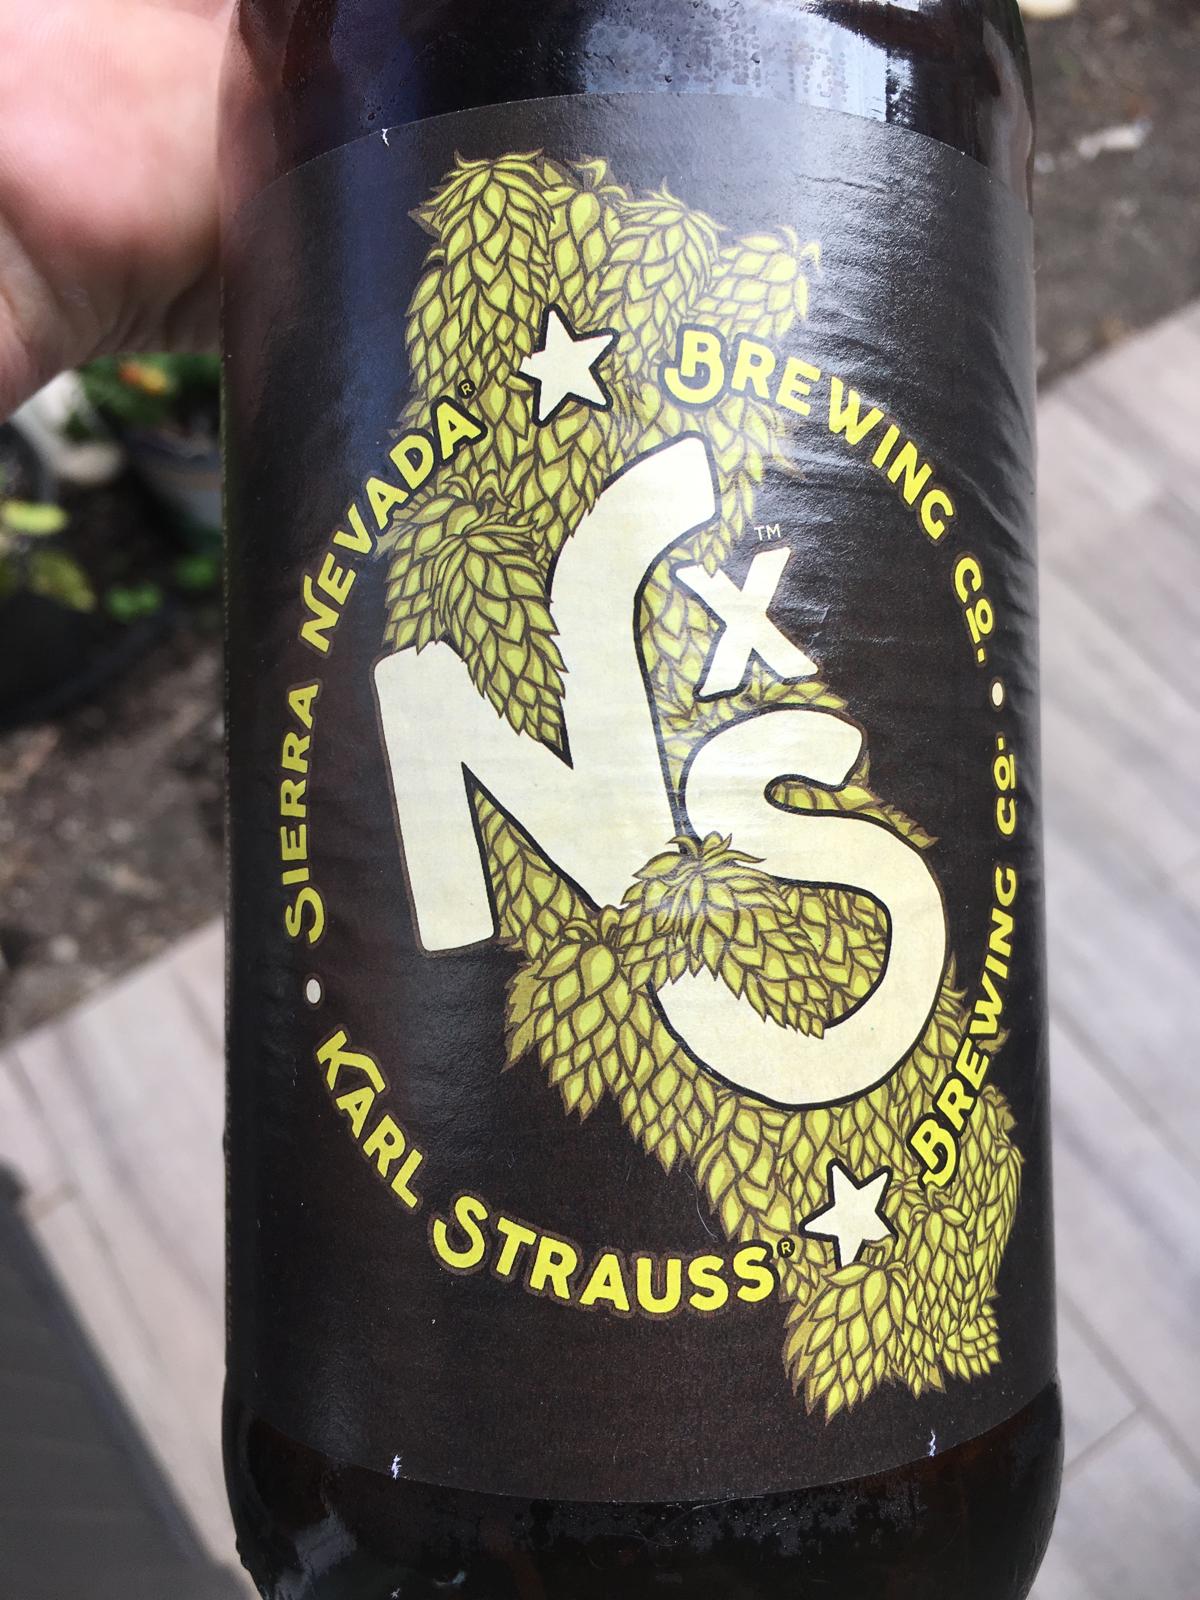 NxS (Collaboration With Sierra Nevada)